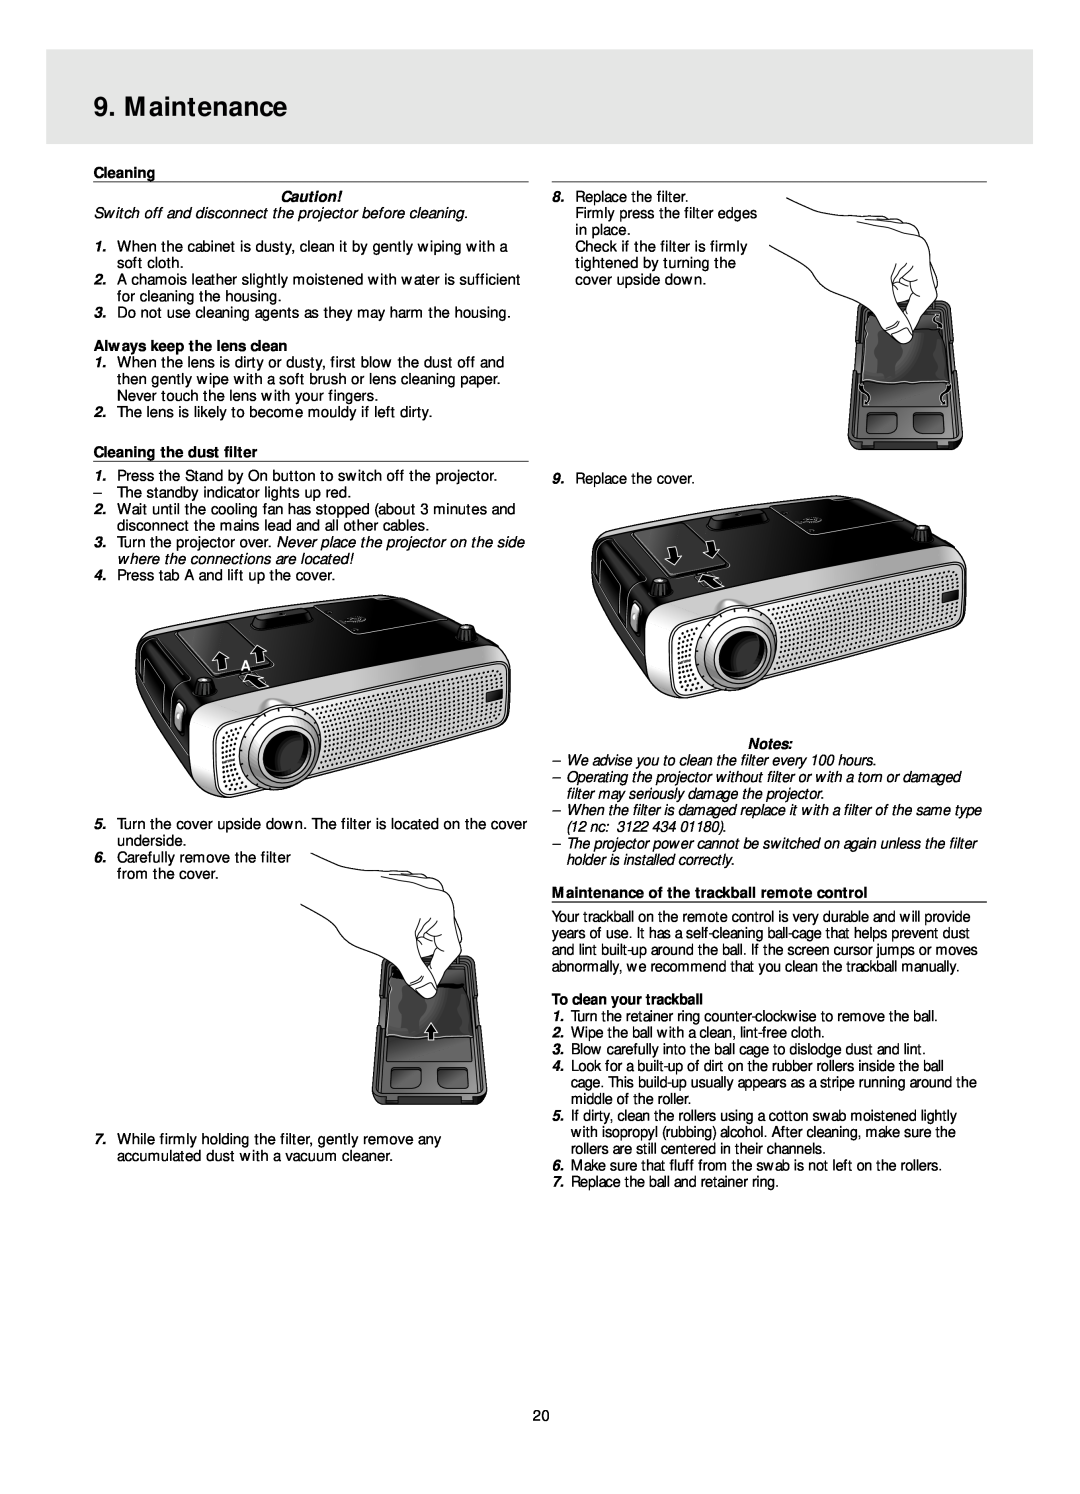 Philips LC4341, LC4331 manual Maintenance, Always keep the lens clean, Cleaning the dust filter, To clean your trackball 